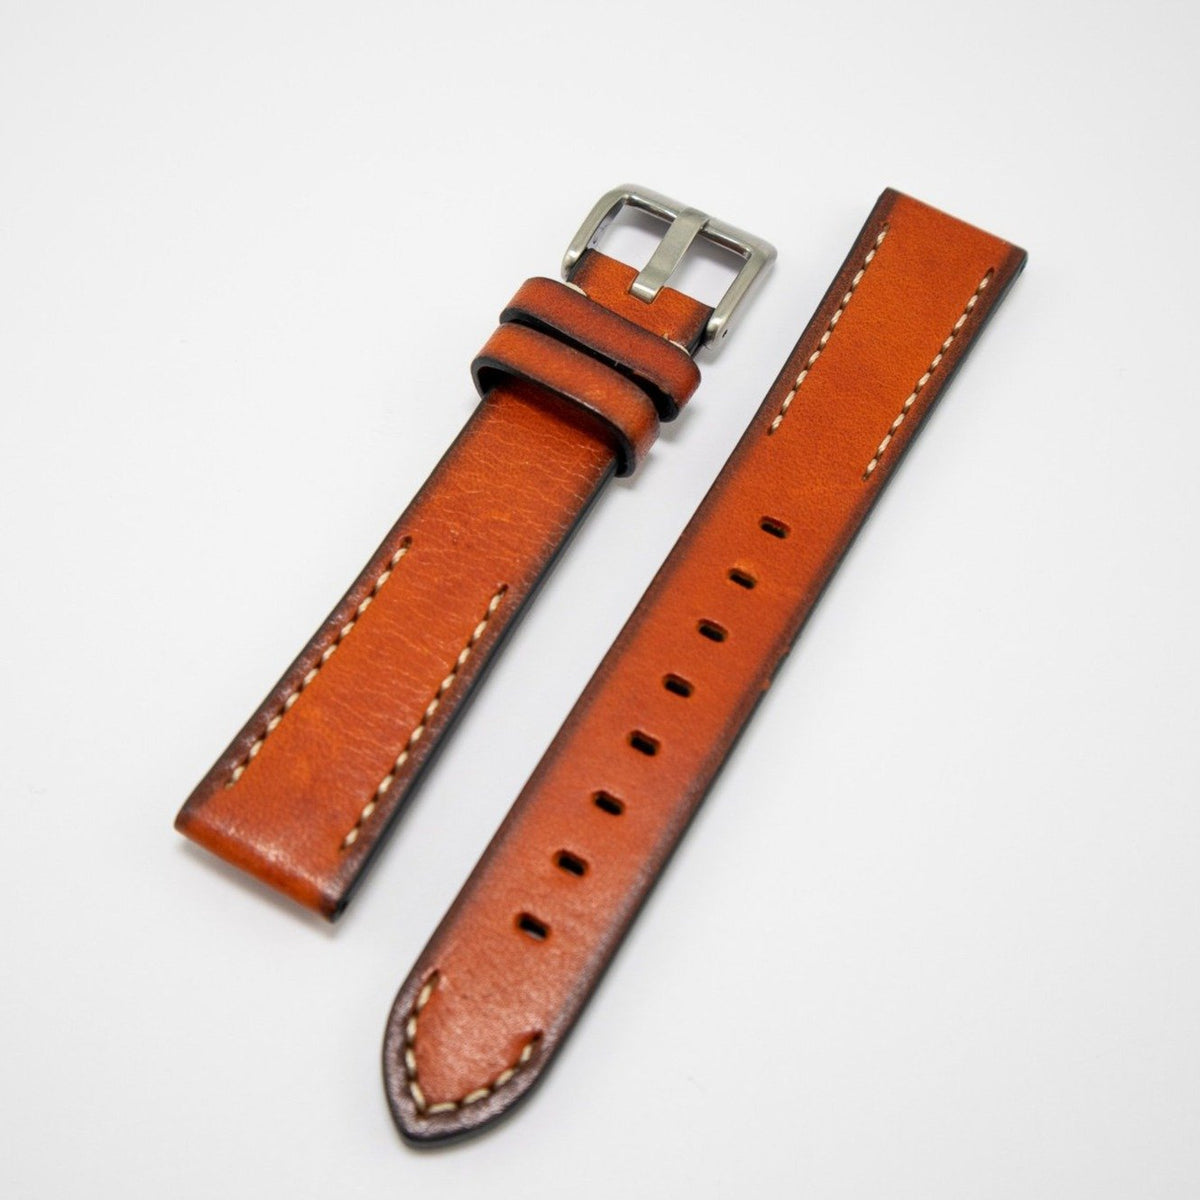 Alpine Watchstrap - Hand painted Leather